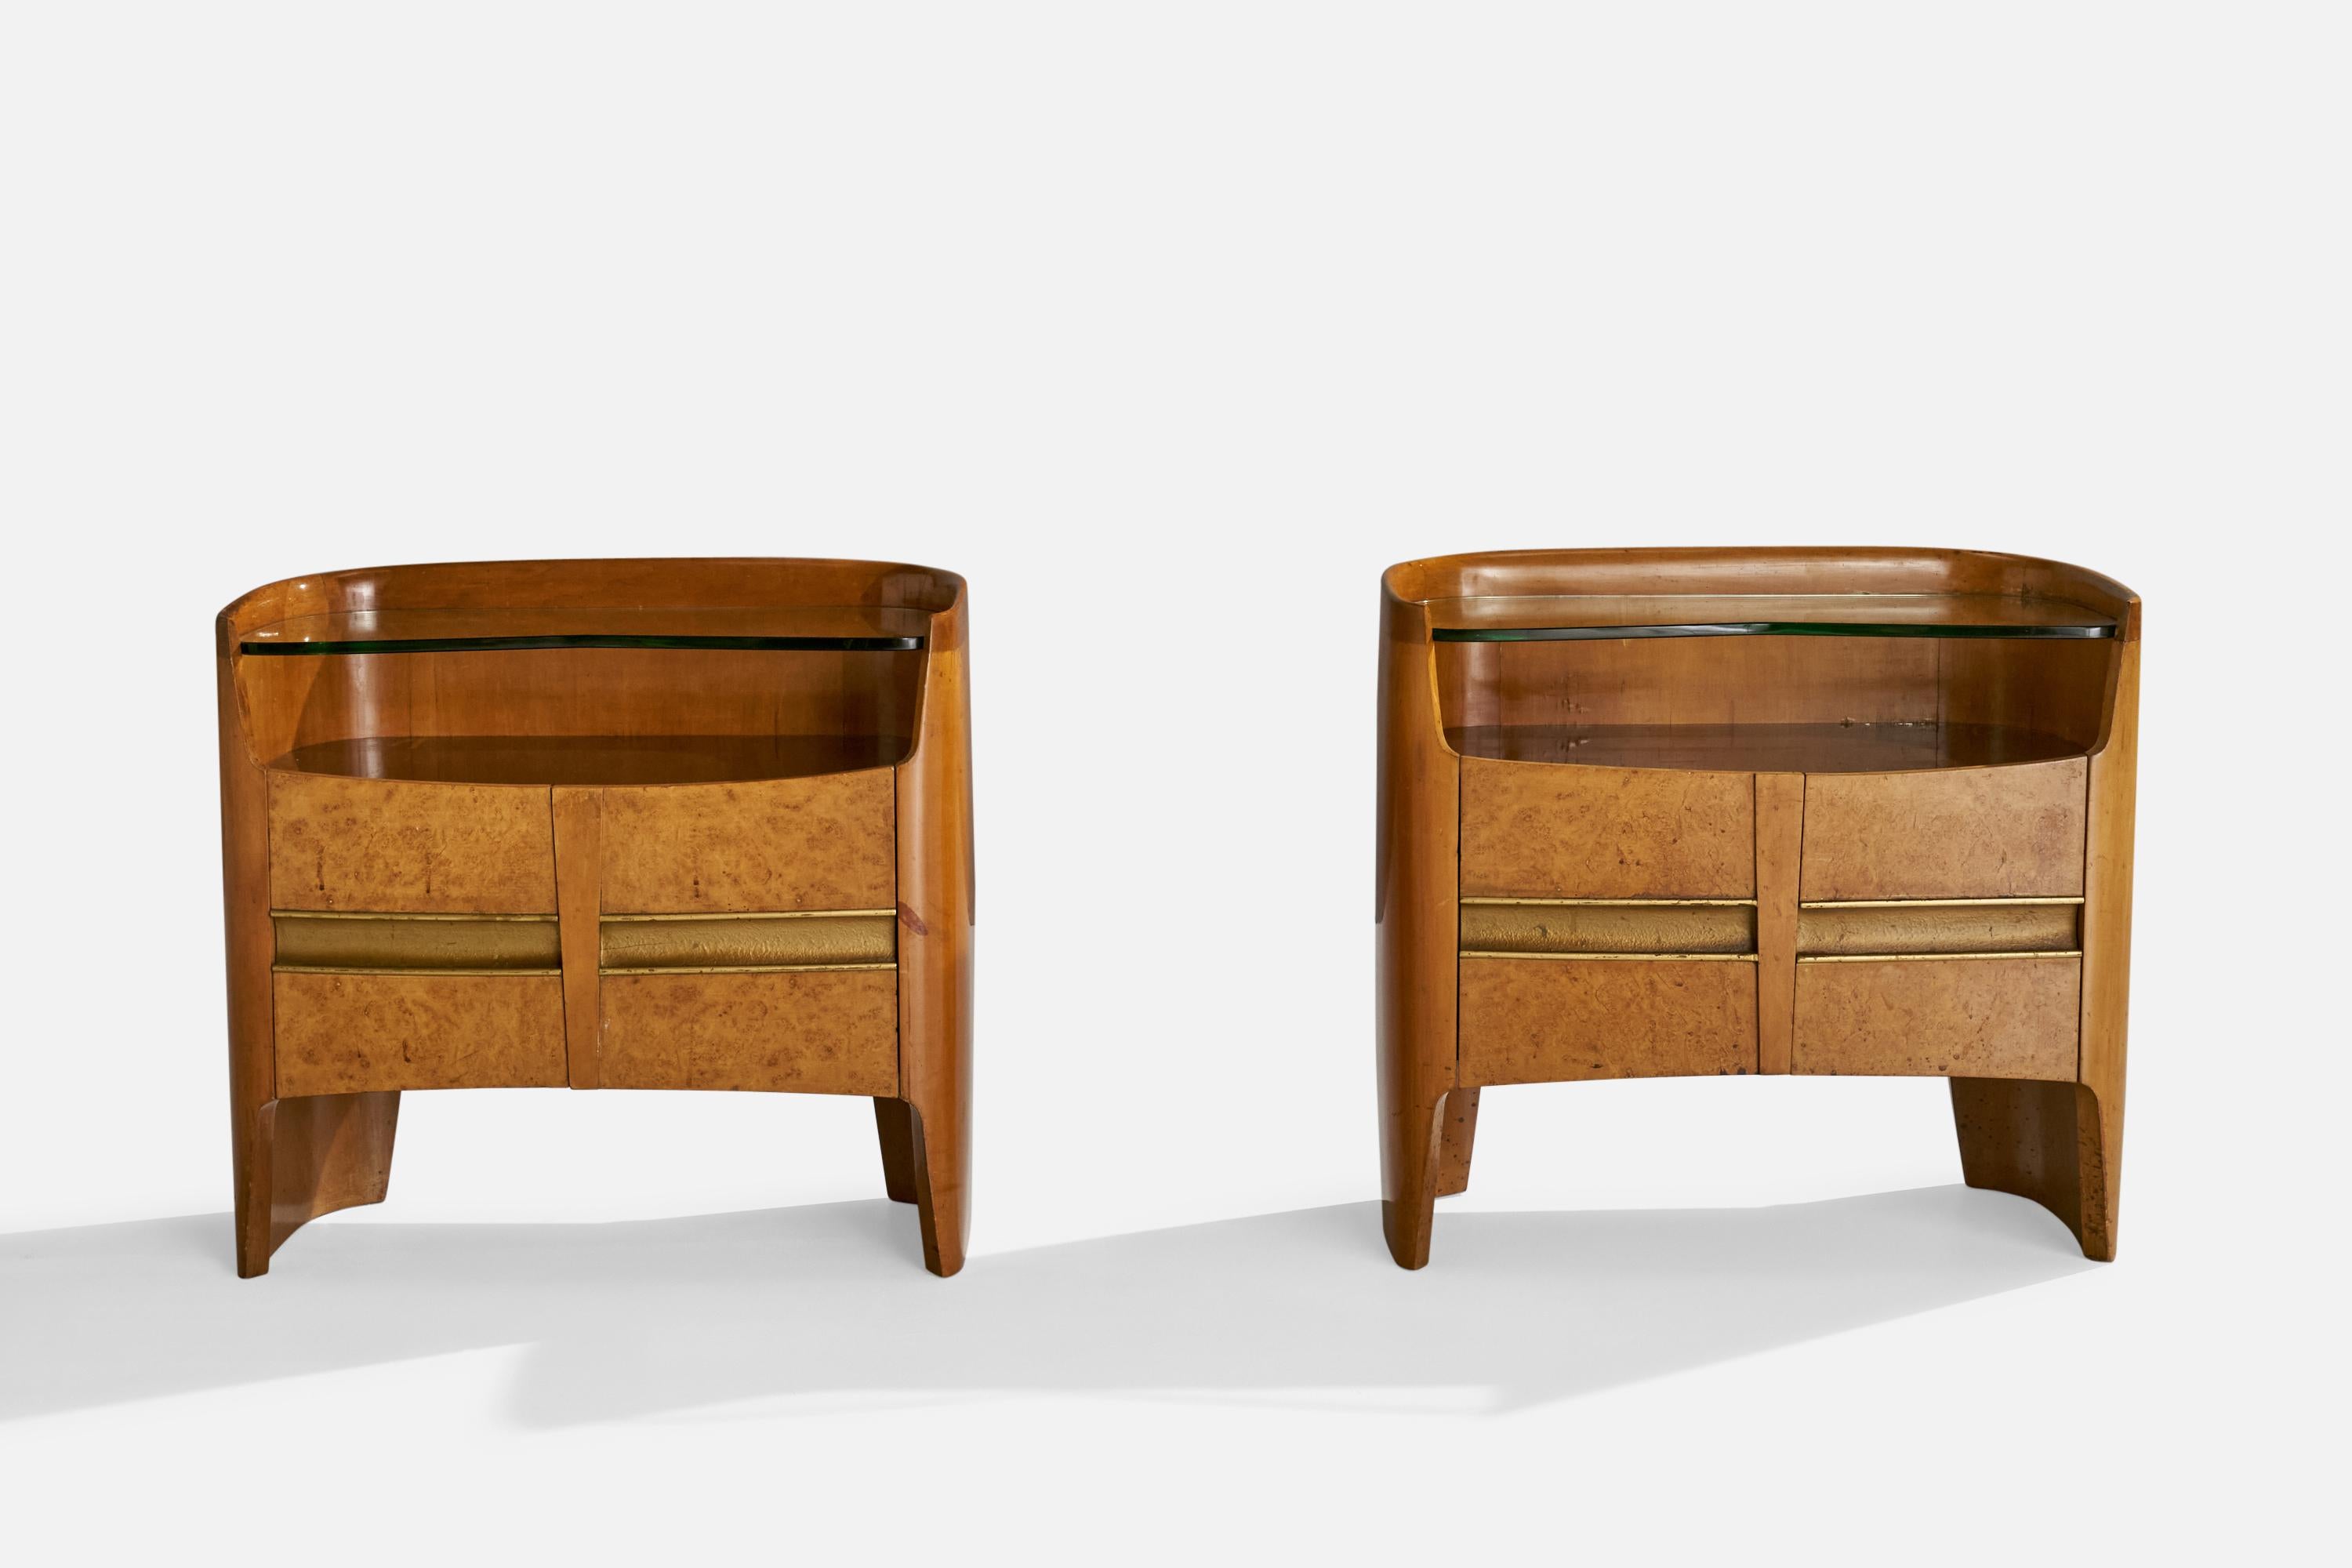 A pair of wood, brass and glass nightstands designed and produced in Italy, 1950s.